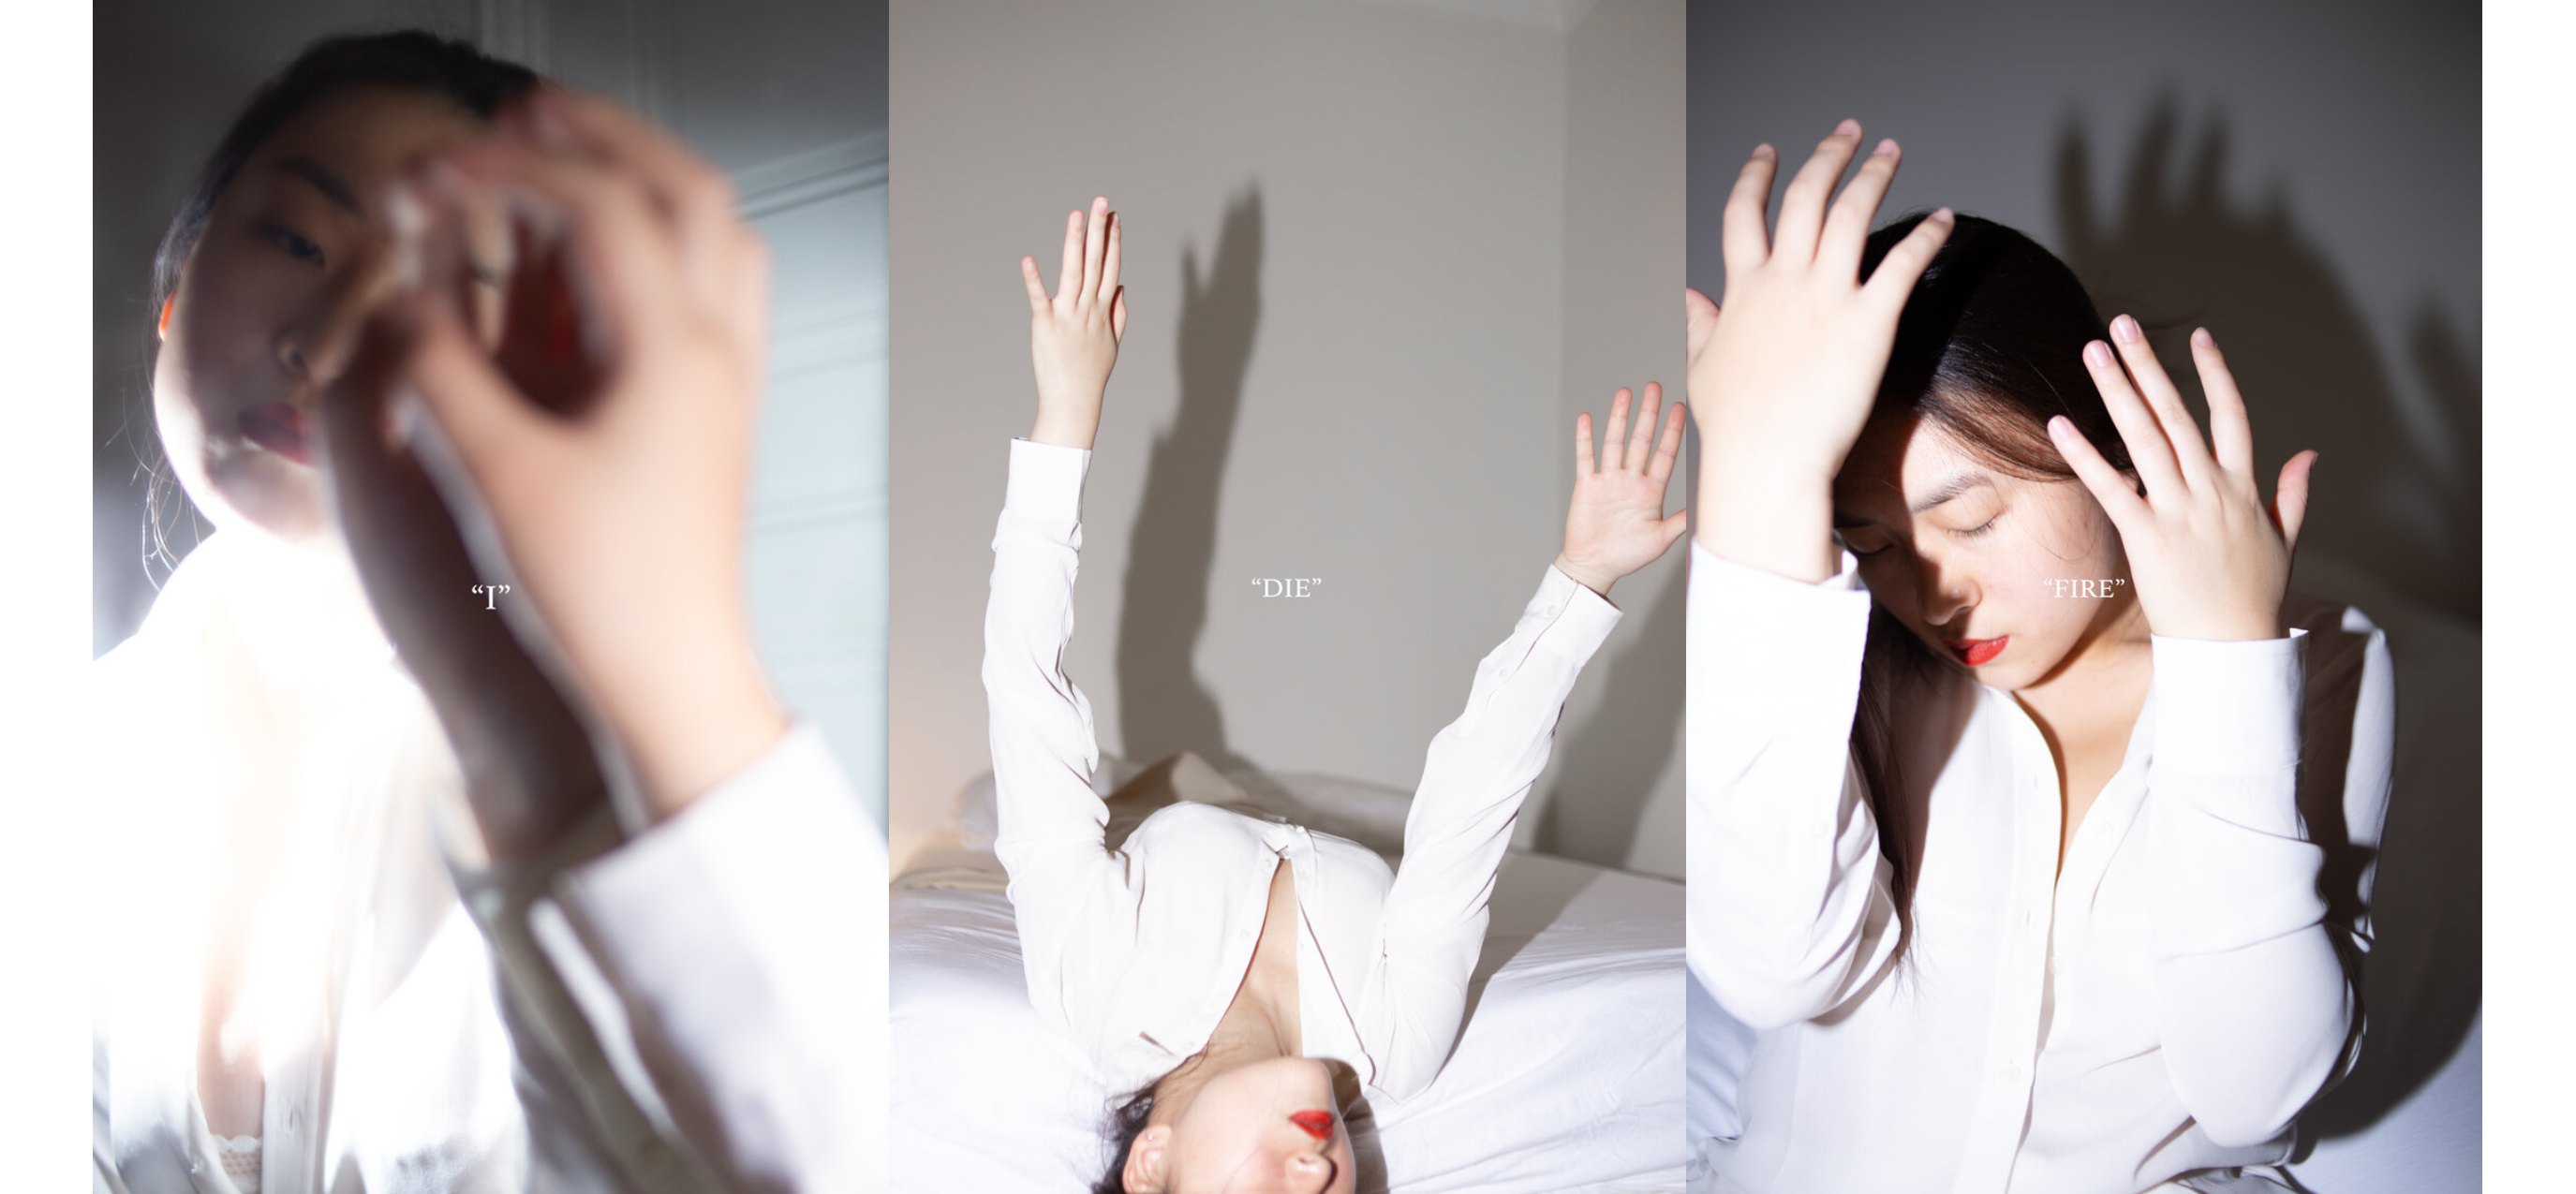 Three images arranged side by side. From left to right: the first image is of a young woman, wearing white, looking in the mirror and resting her hand on the glass. “I” is printed in white on the photo; the second image is of the same young woman wearing white. She is lying on a bed and her arms are up in air. “DIE” is printed in white on the photo; the third image is of the same young woman wearing white. Her arms shield her face and “FIRE” Is printed in white on the photo.